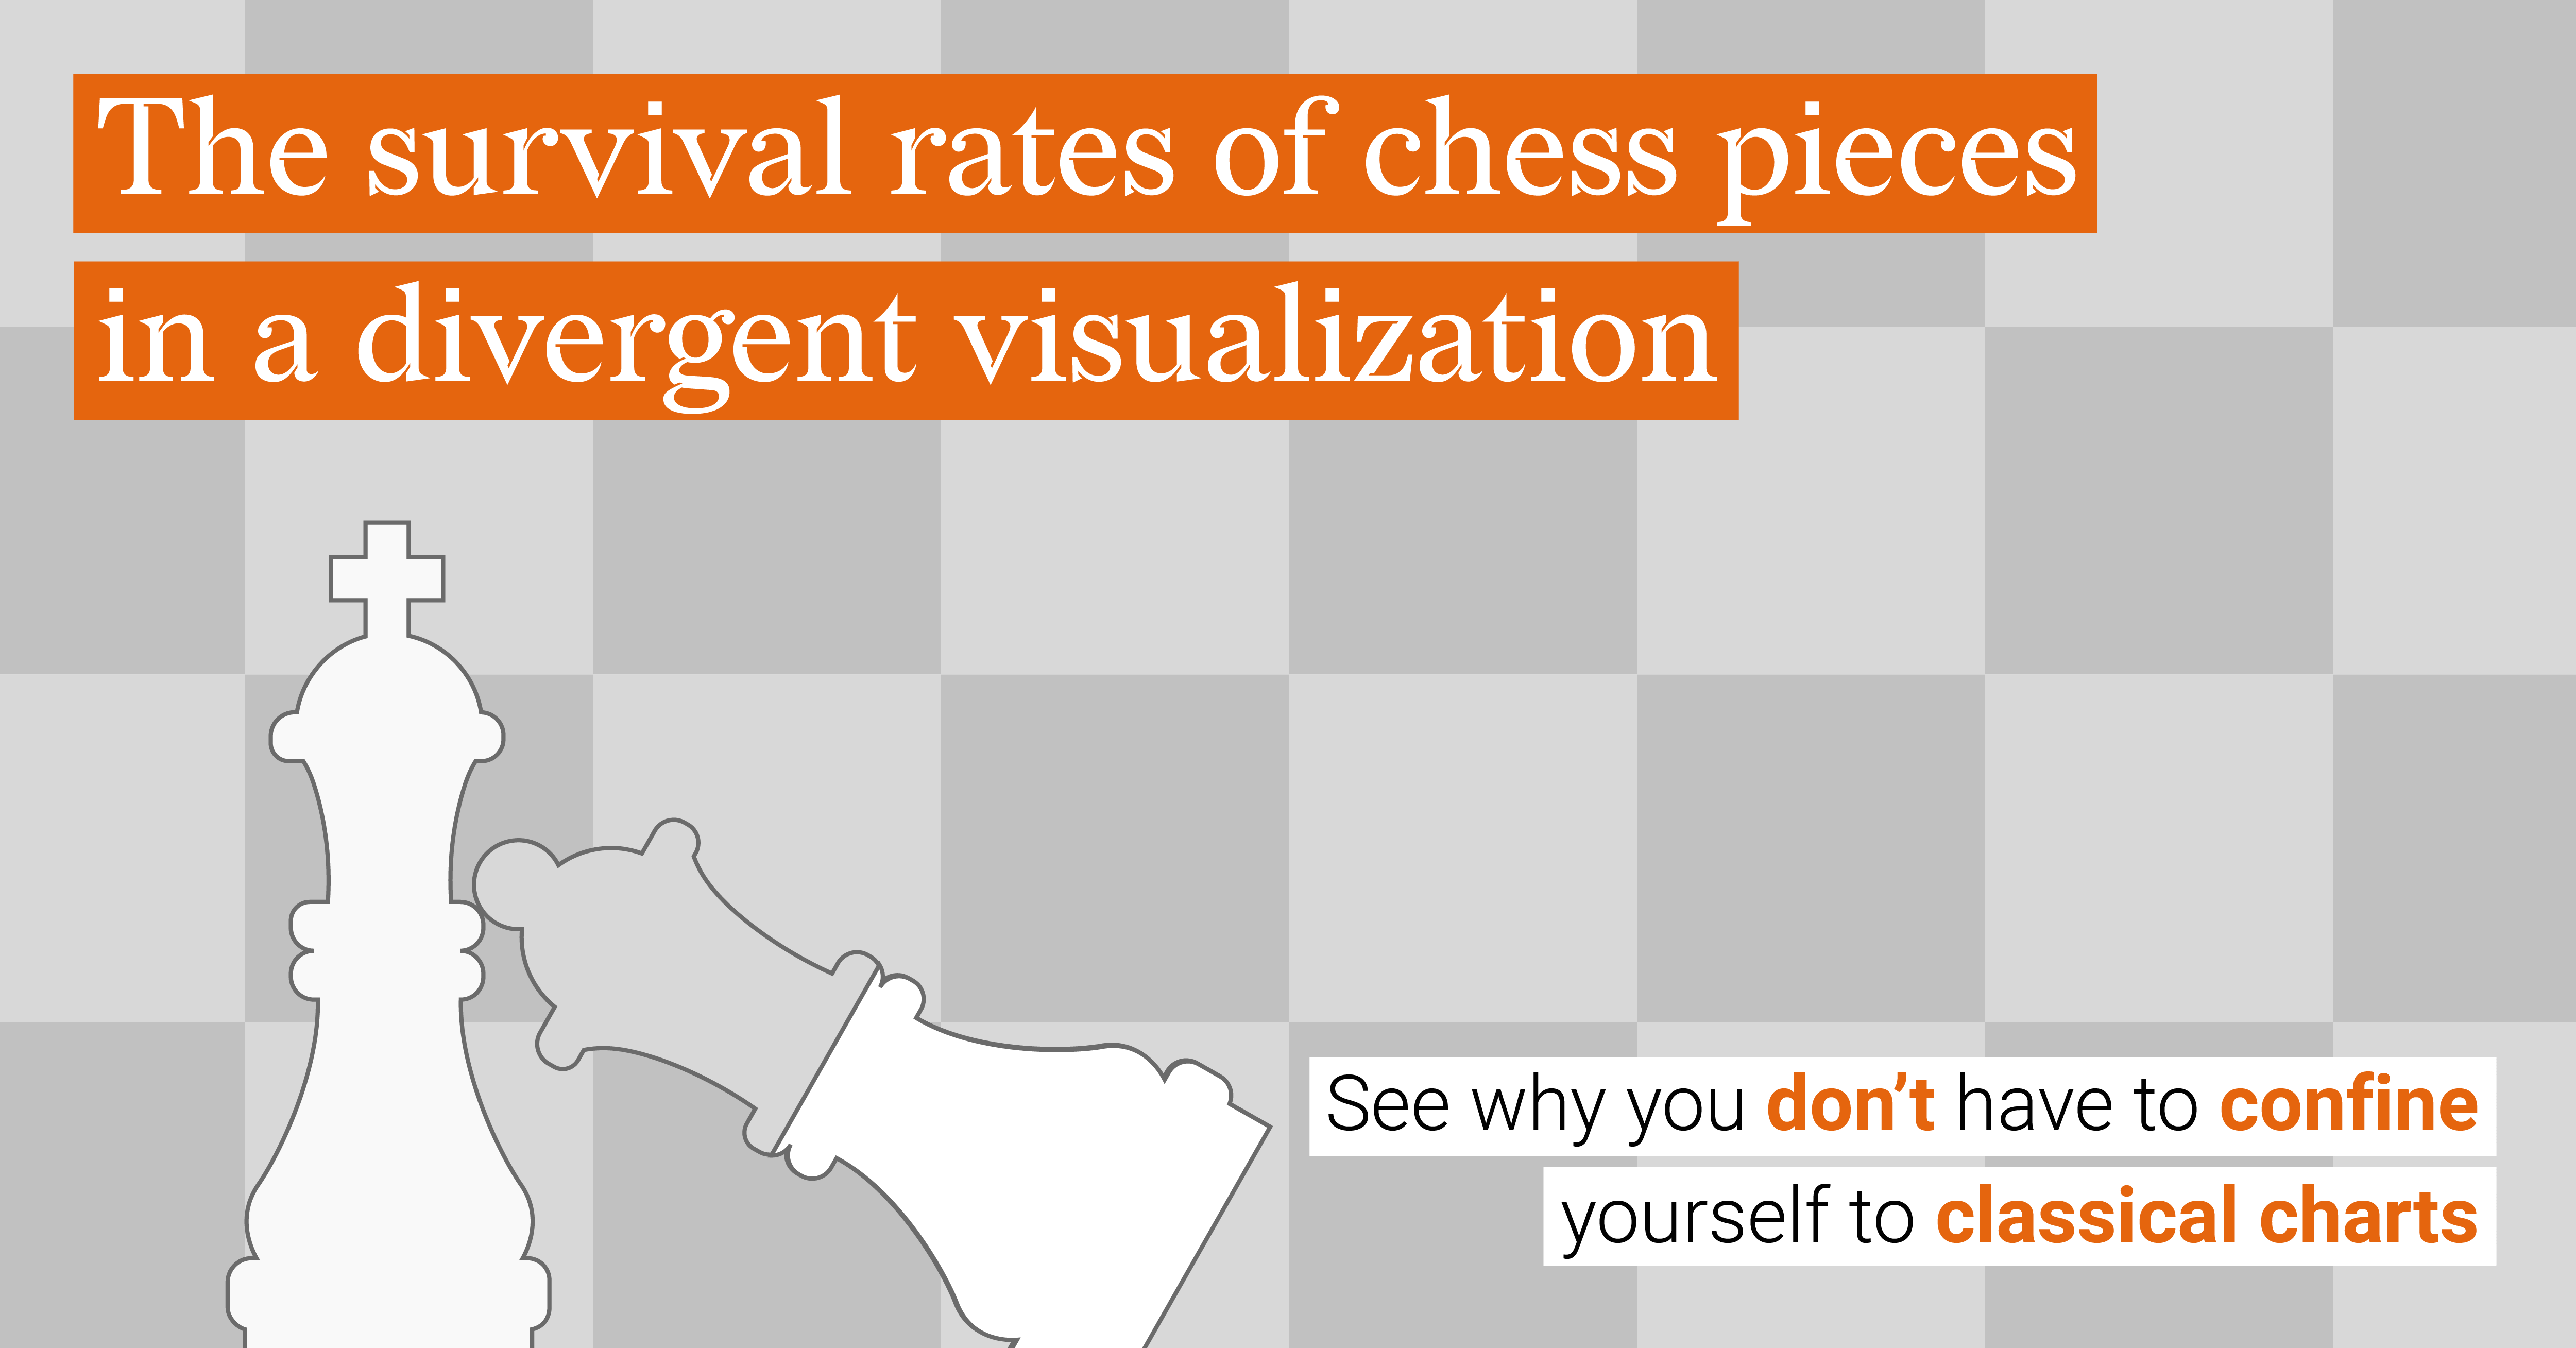 7 Crucial Chess Rules You Need to Know